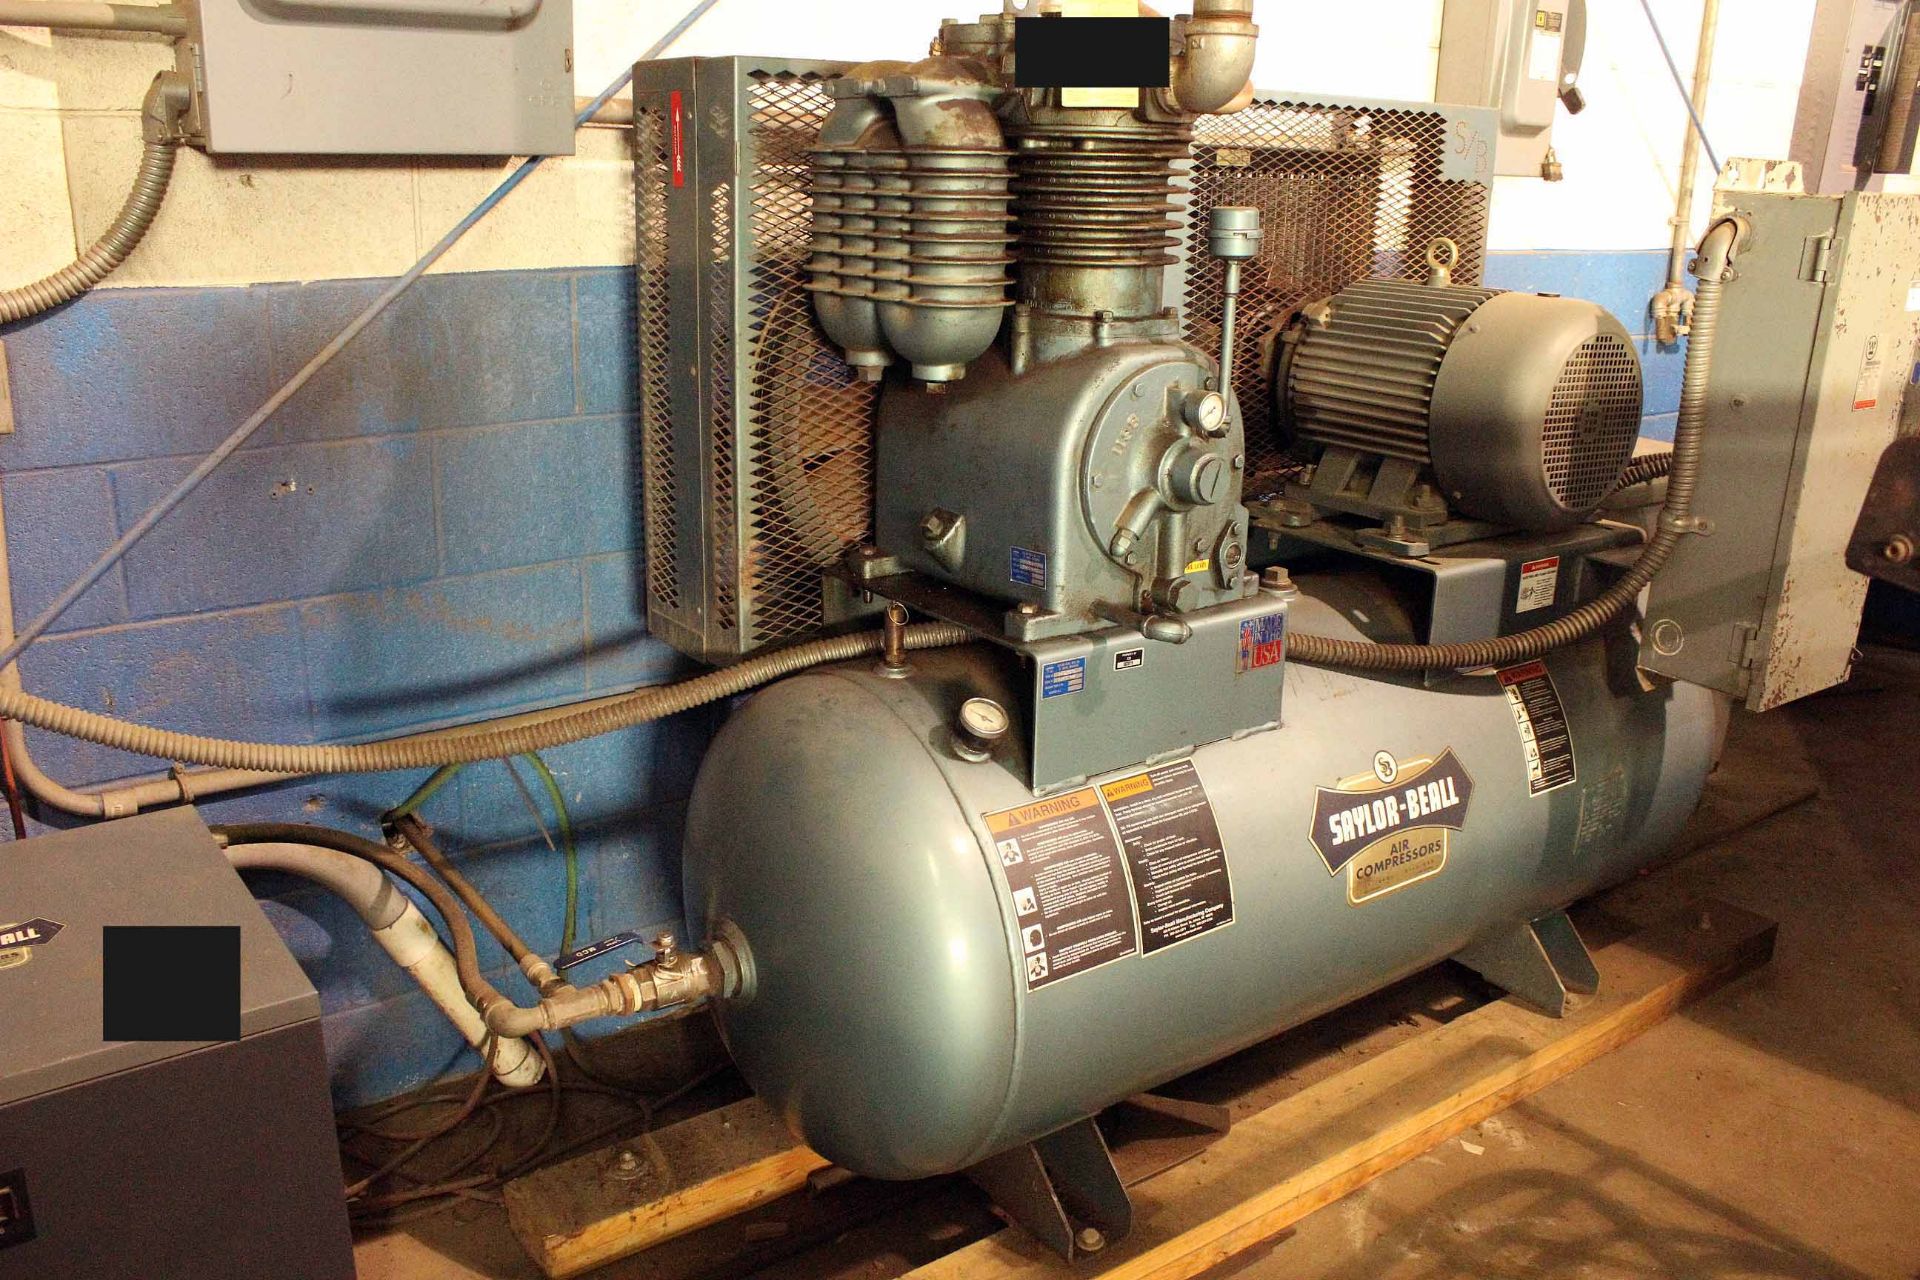 RECIPROCATING TYPE AIR COMPRESSOR, SAYLOR BEALL MDL. PL-451512, new 2007, 15 HP motor, 60 gal. - Image 2 of 4